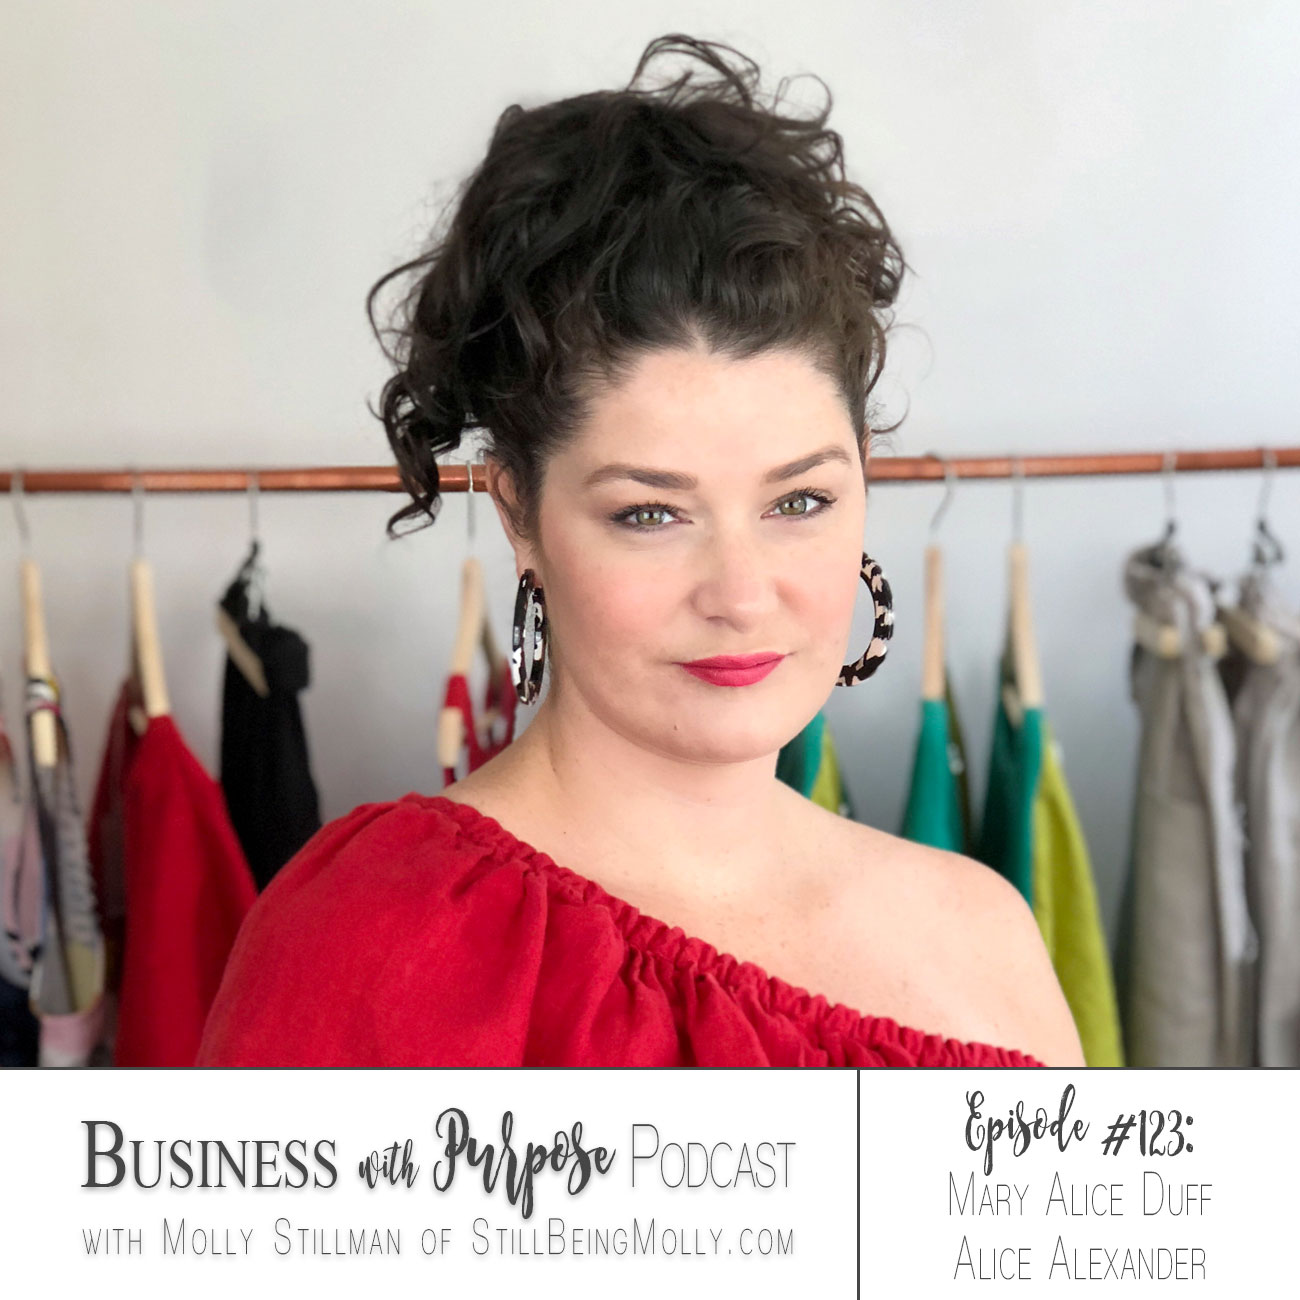 Business with Purpose Podcast EP 123: Mary Alice Duff, Alice Alexander Co.